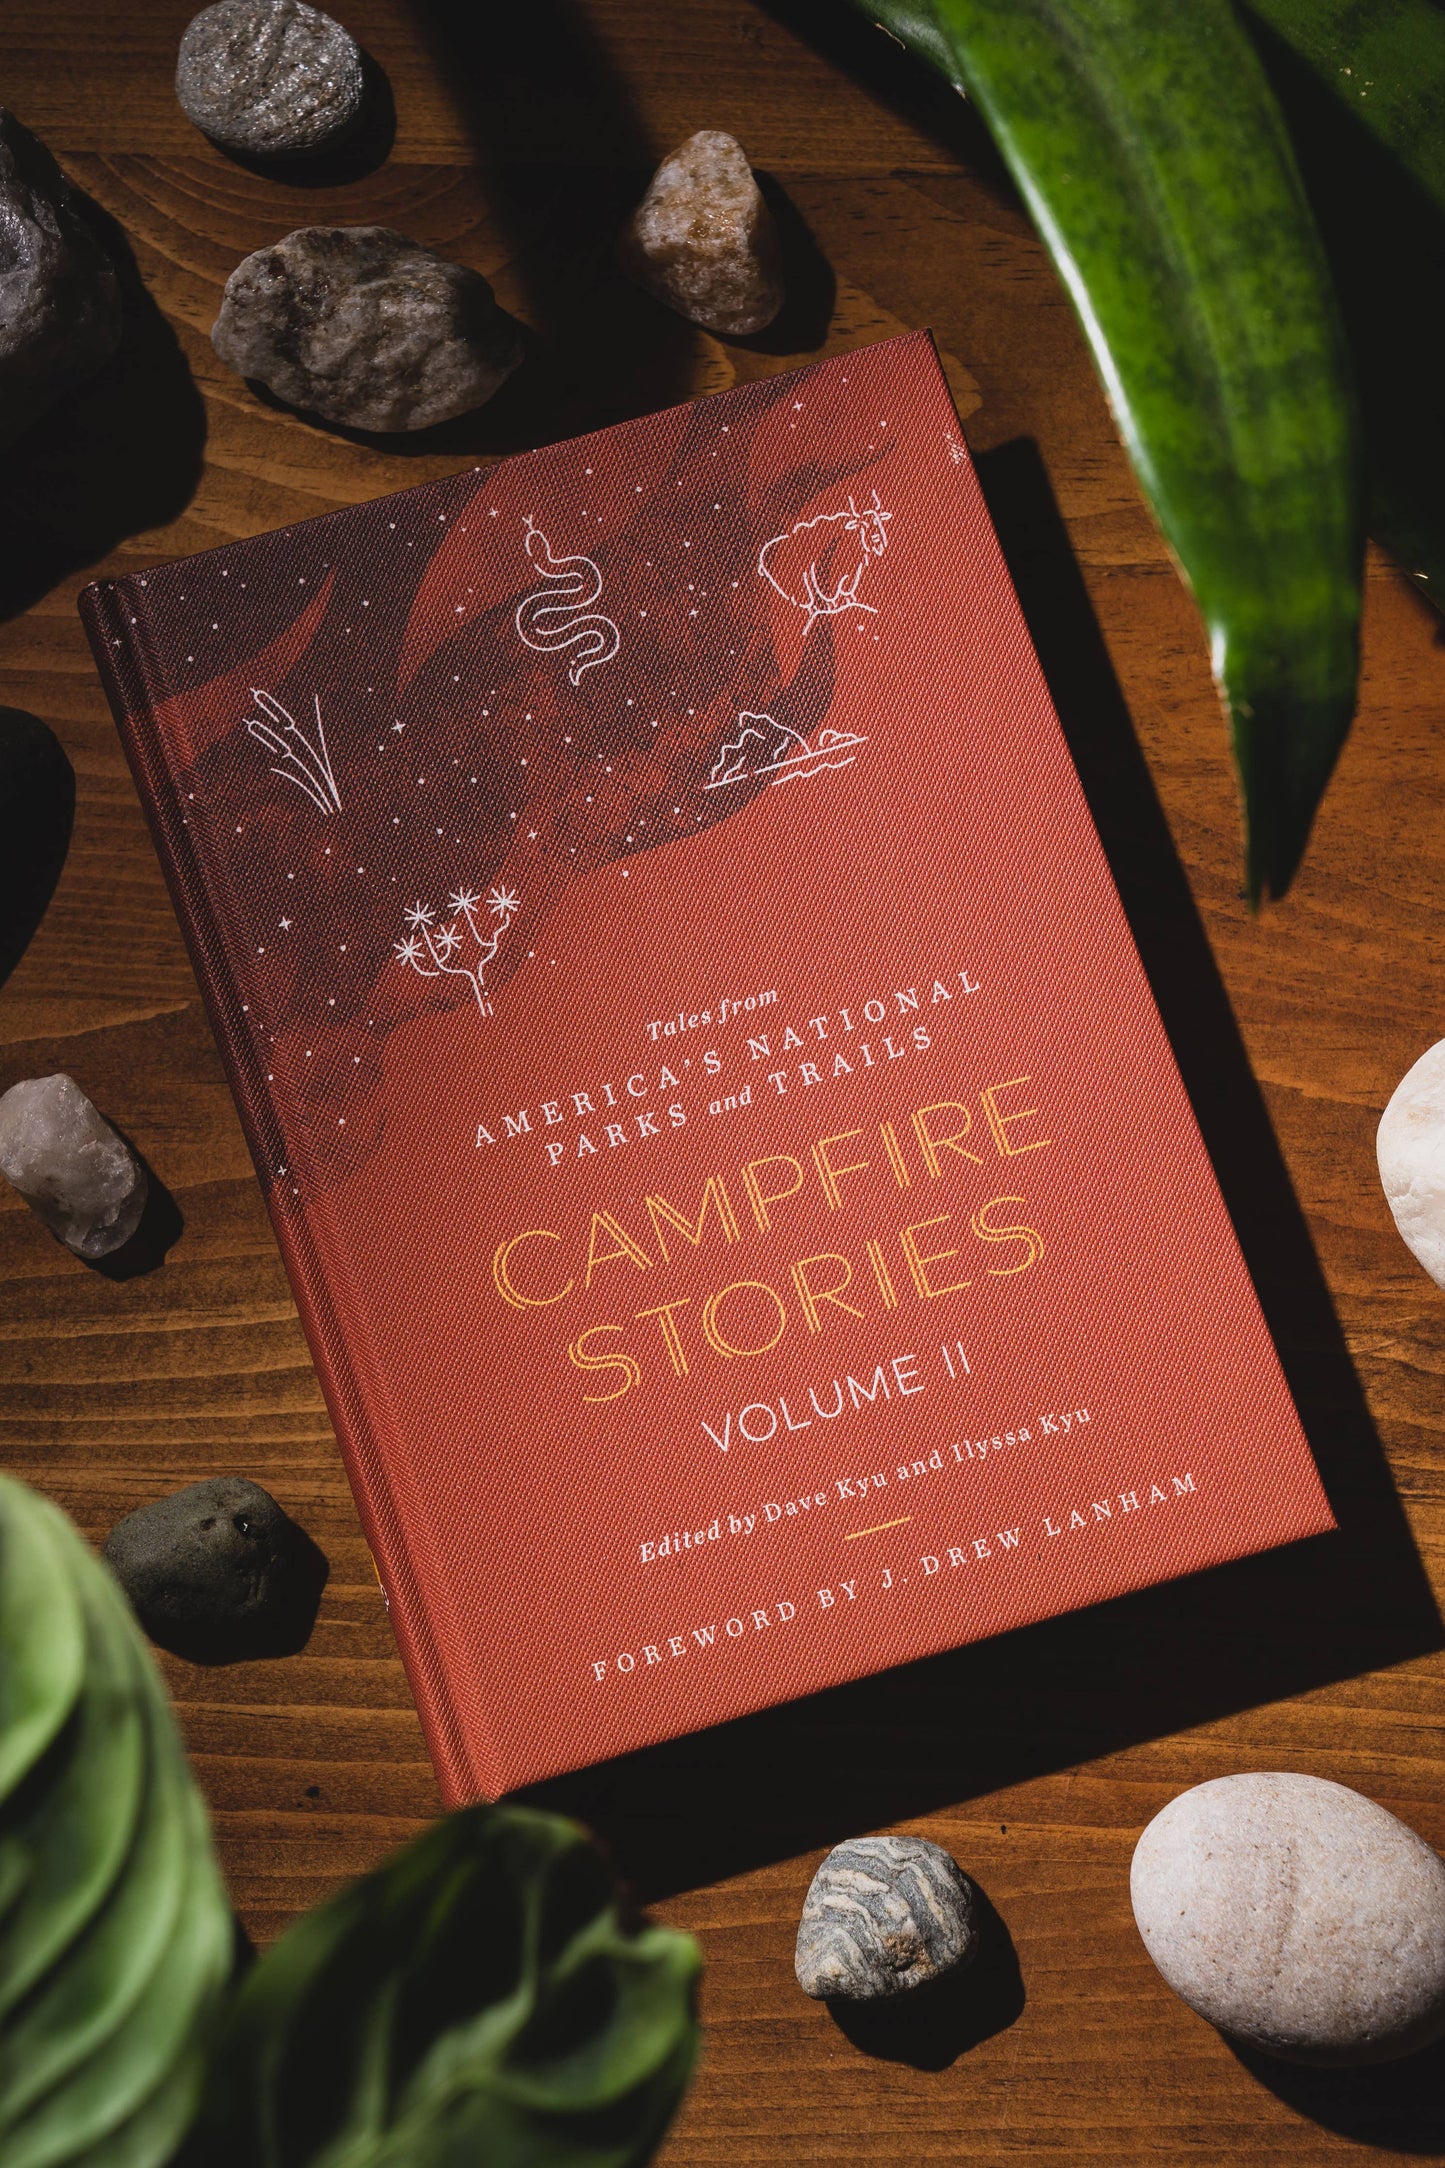 Campfire Stories Volume II:: Tales from America's National Parks & Trails